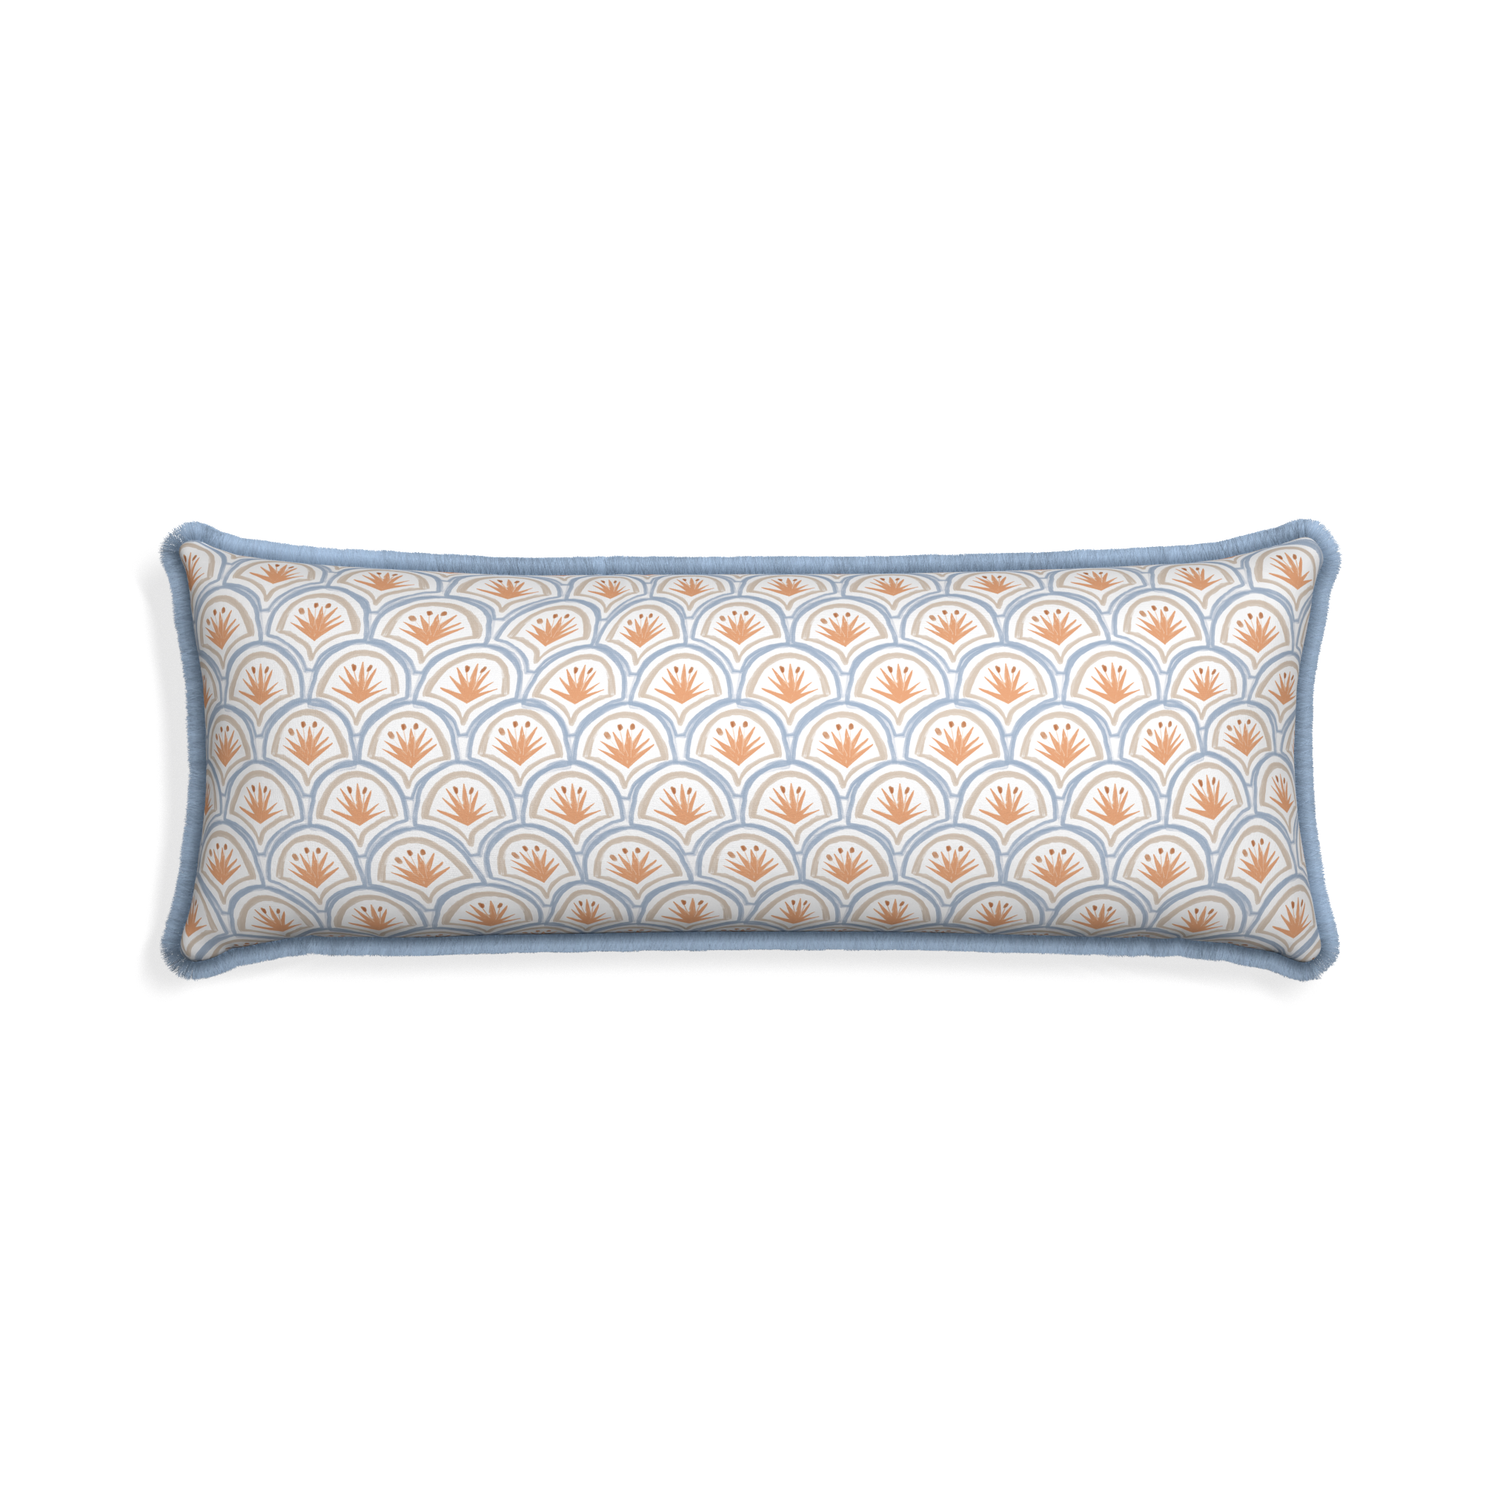 Xl-lumbar thatcher apricot custom art deco palm patternpillow with sky fringe on white background